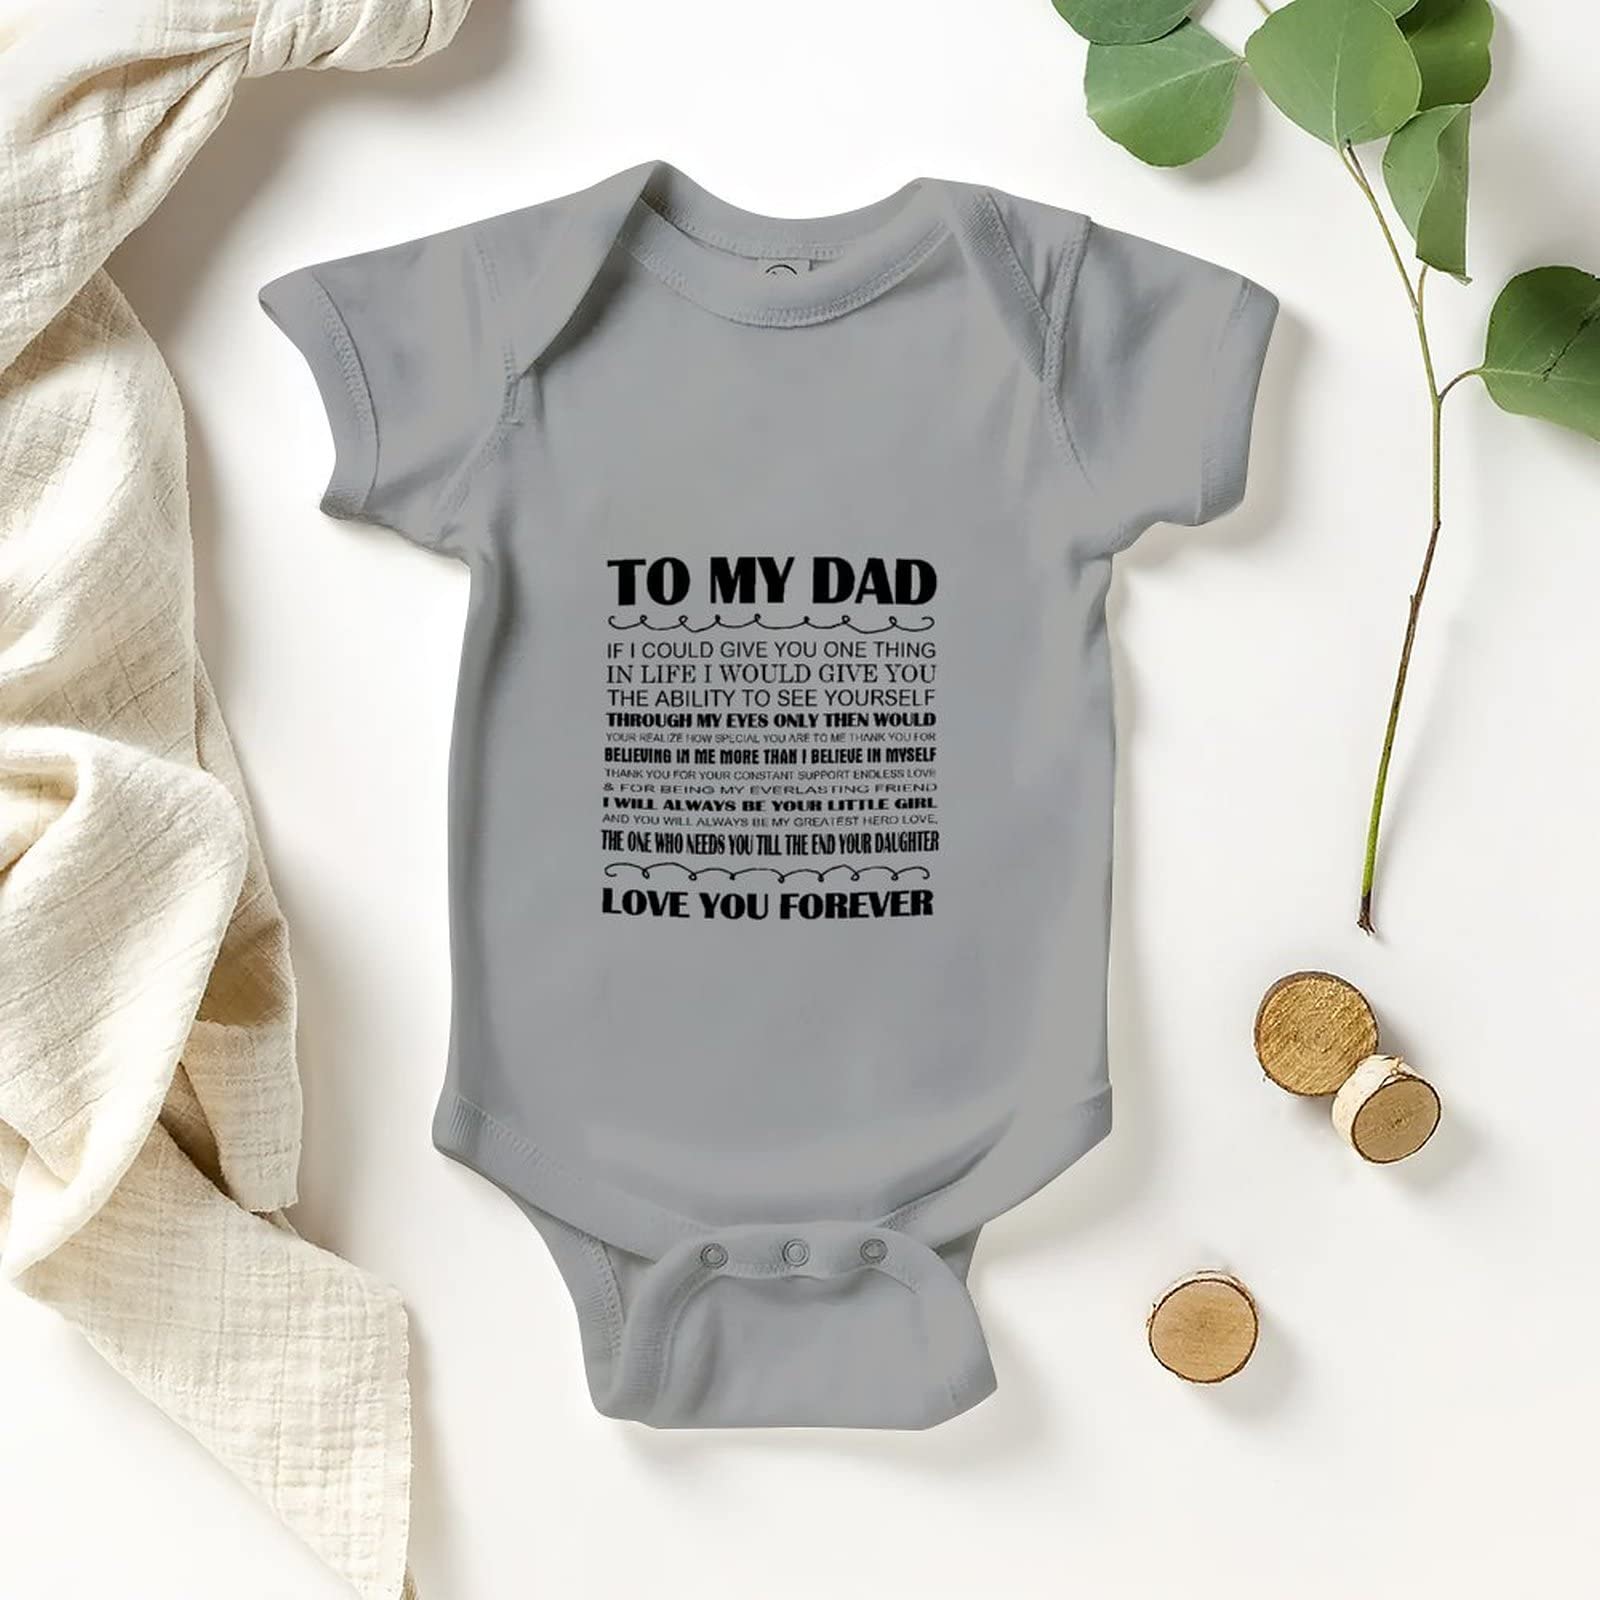 Baby Bodysuits Cotton Comfortable Sleep And Play For Unisex Baby Infant One-Piece Short-Sleeve Baby Shower Gifts